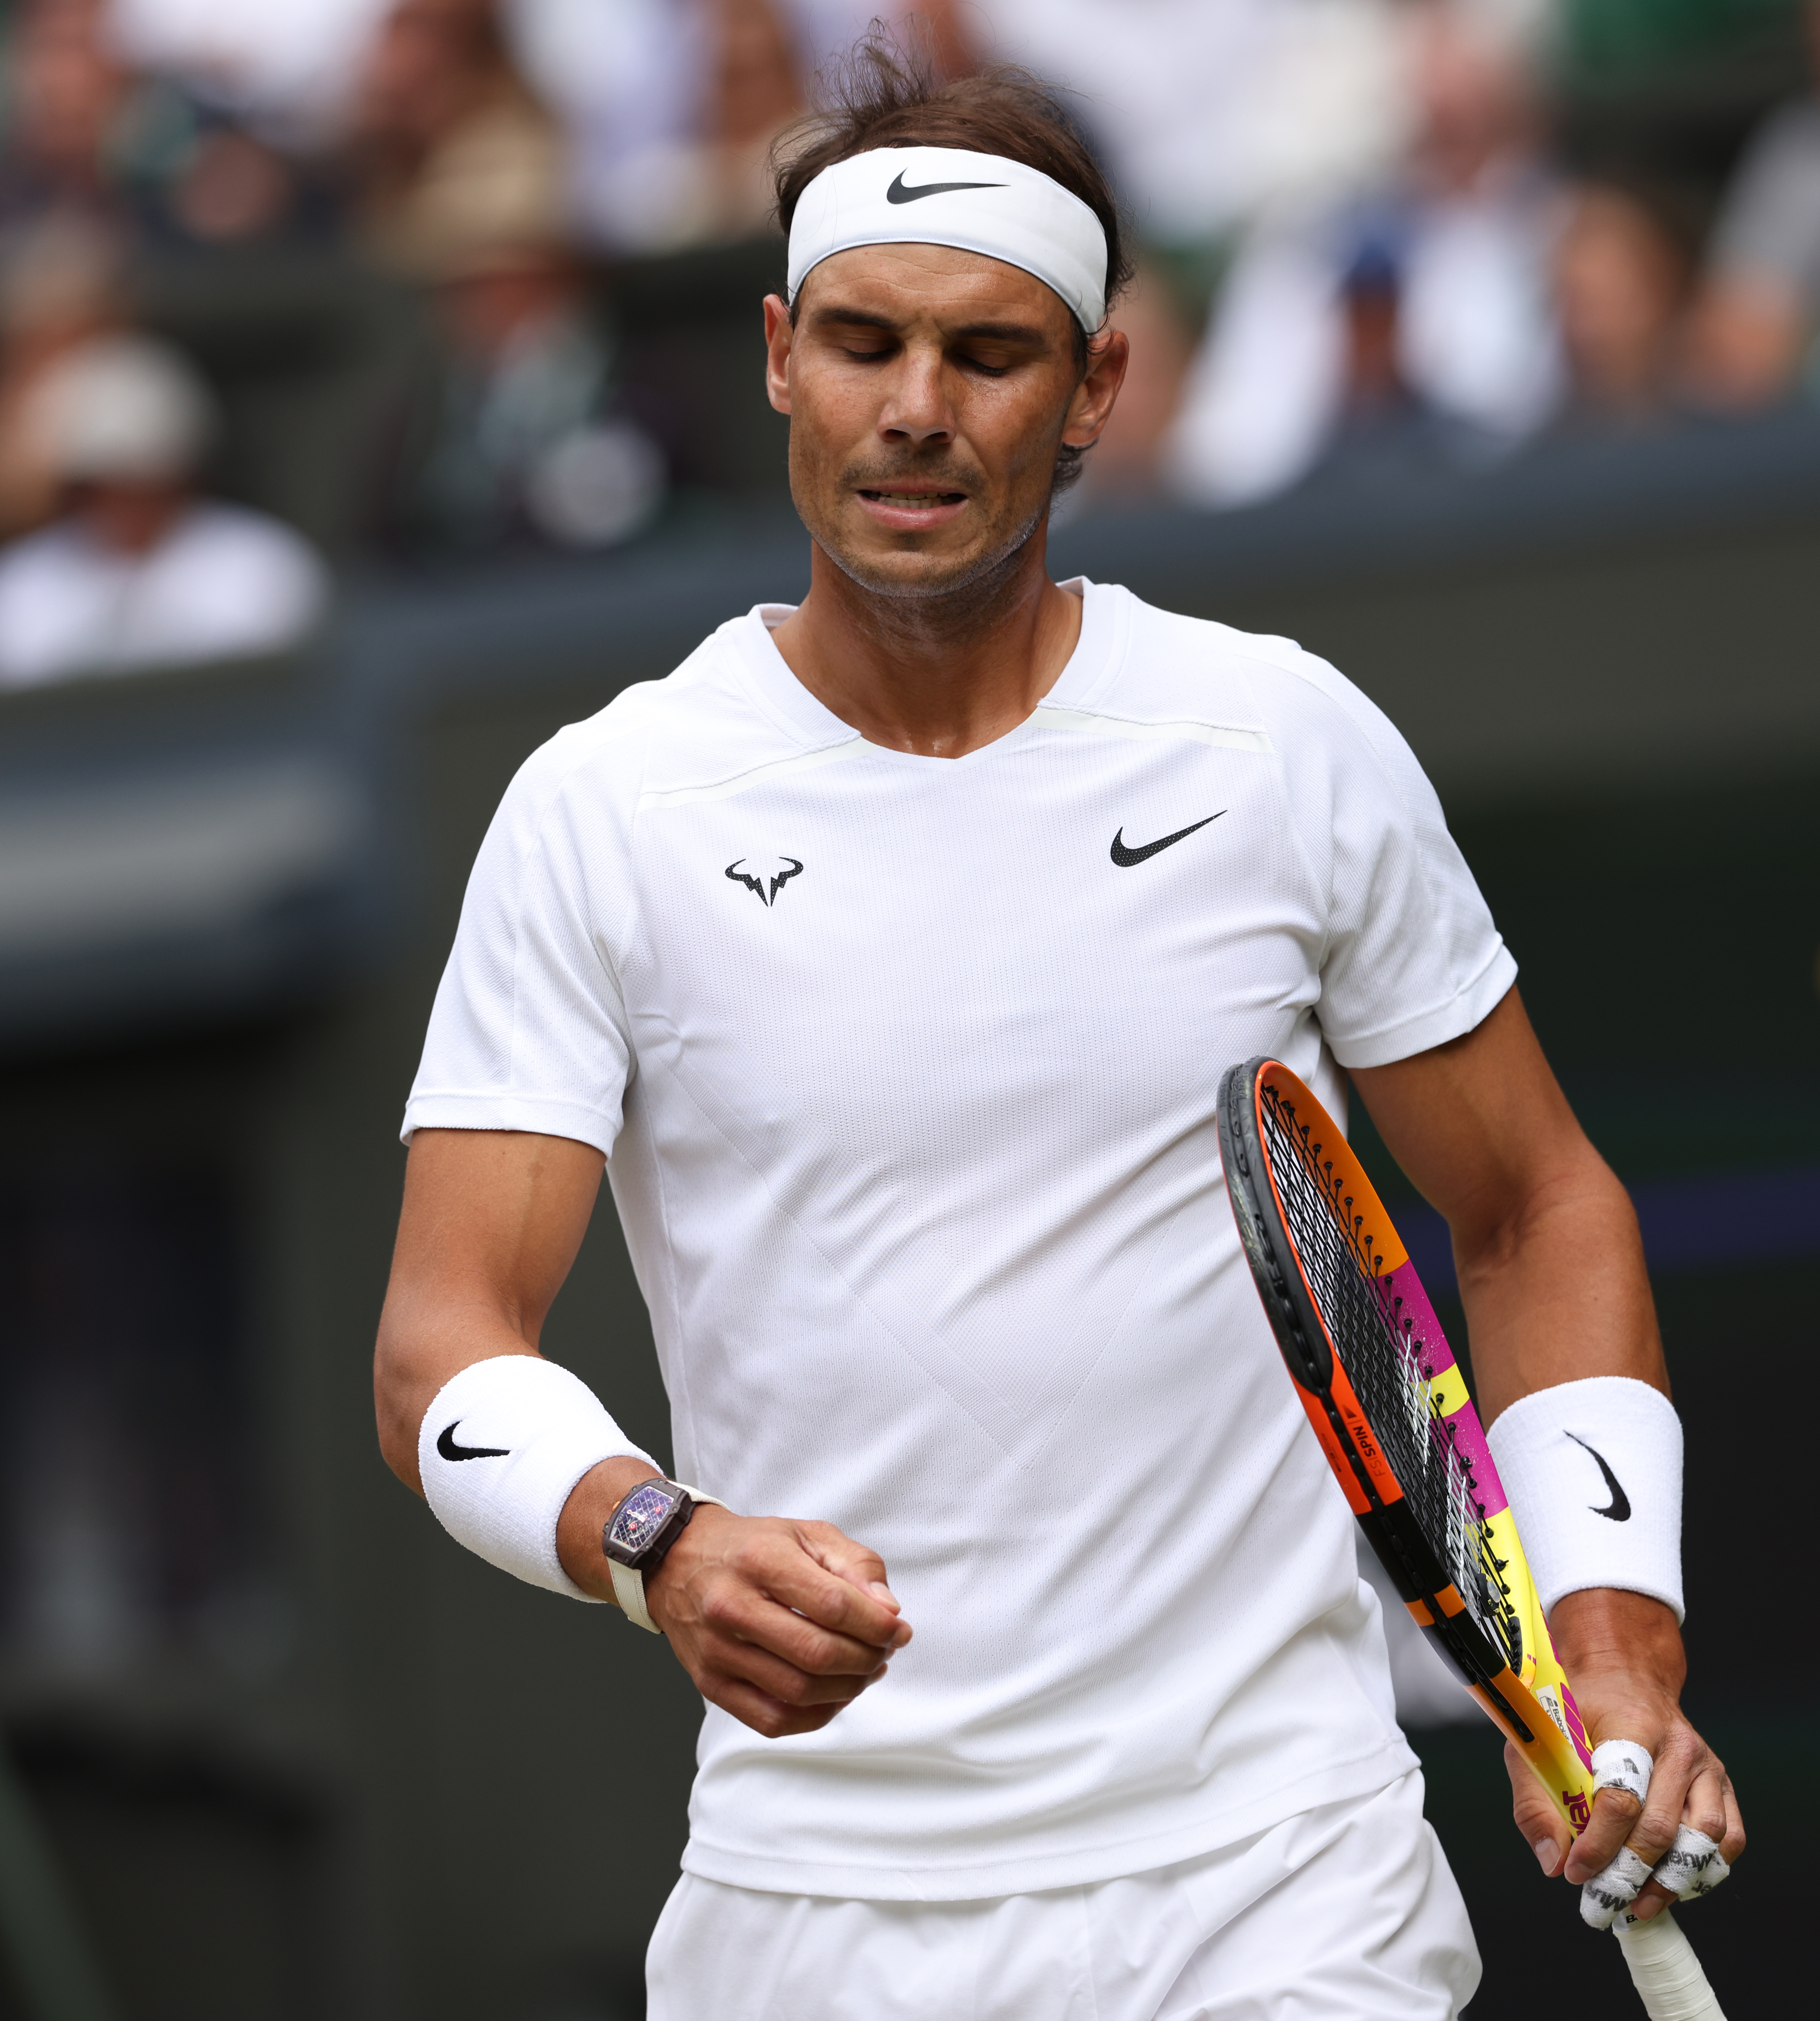 Rafael Nadal of Spain during his Gentlemens Quarter-Final match against Taylor Fritz of the United States of America during day ten of The Championships Wimbledon 2022 at All England Lawn Tennis and Croquet Club on July 6, 2022 in London, England.